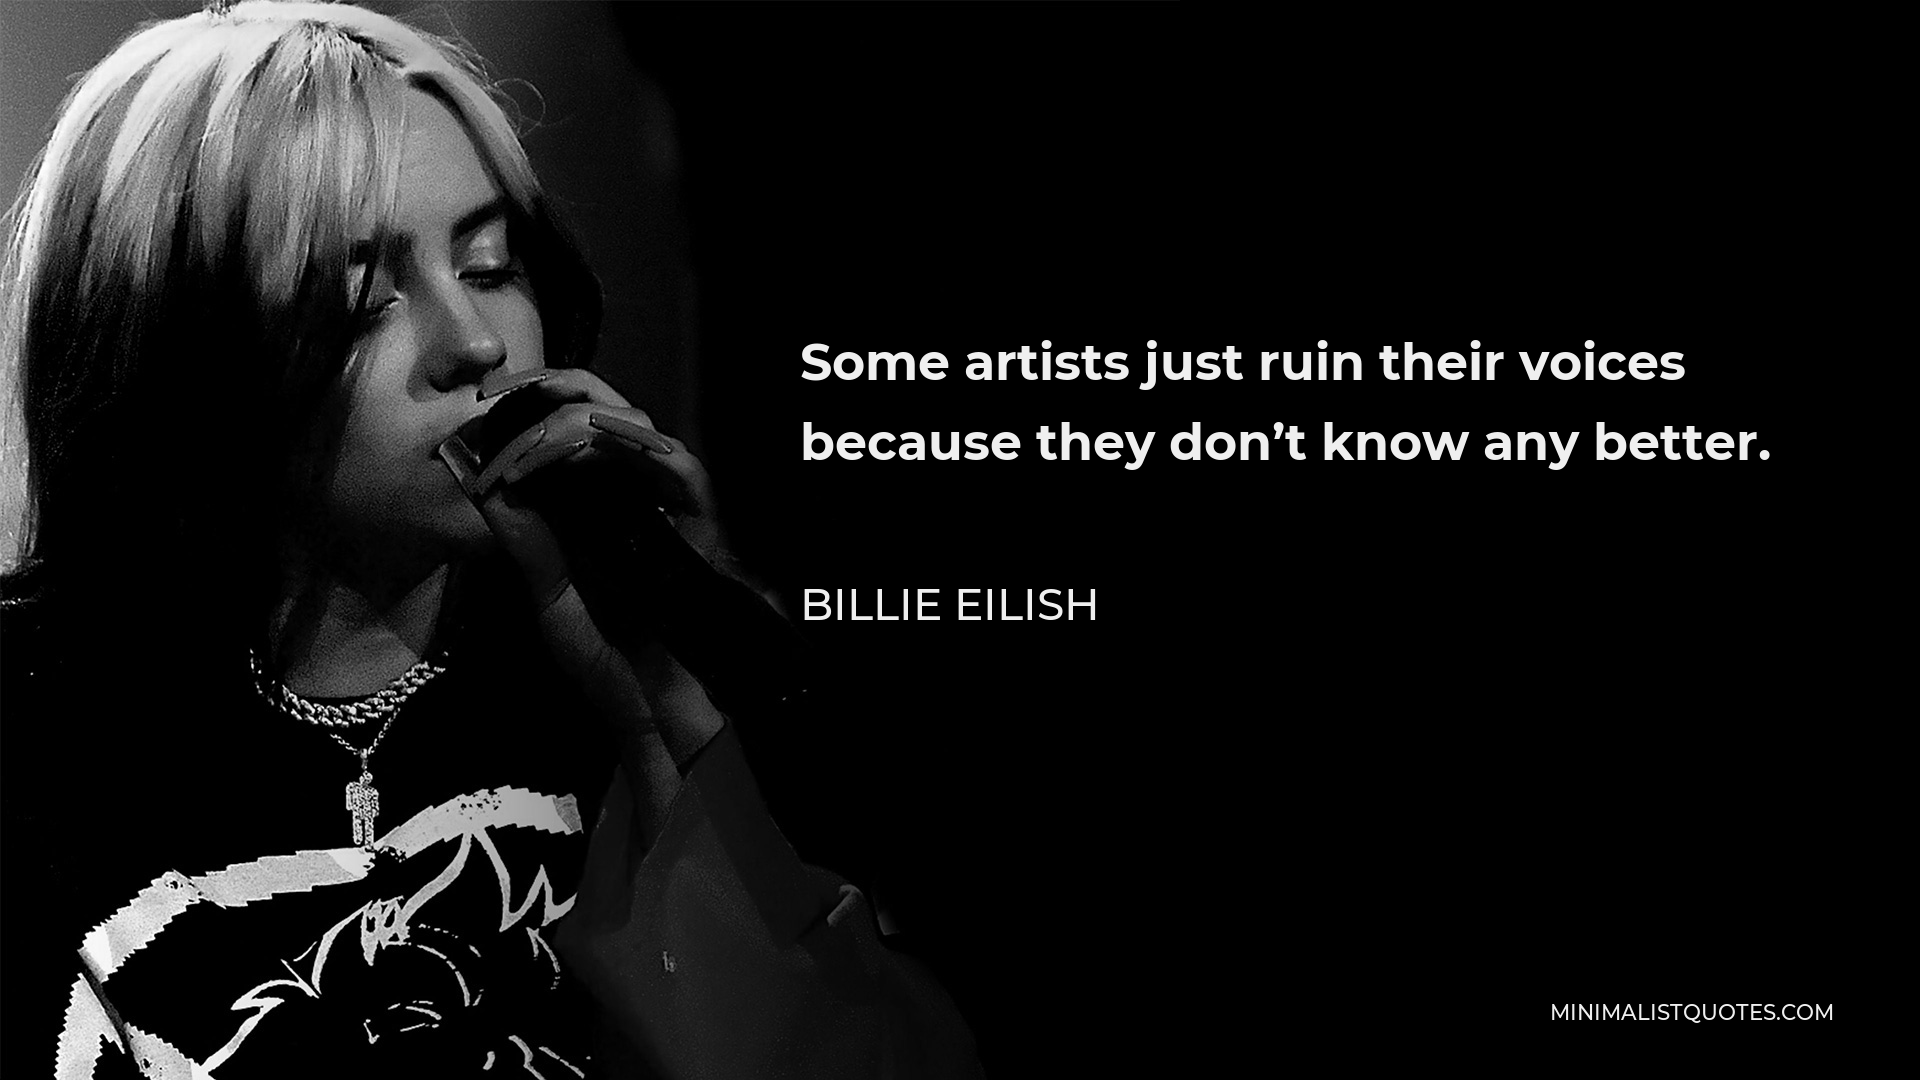 Billie Eilish Quote - Some artists just ruin their voices because they don’t know any better.